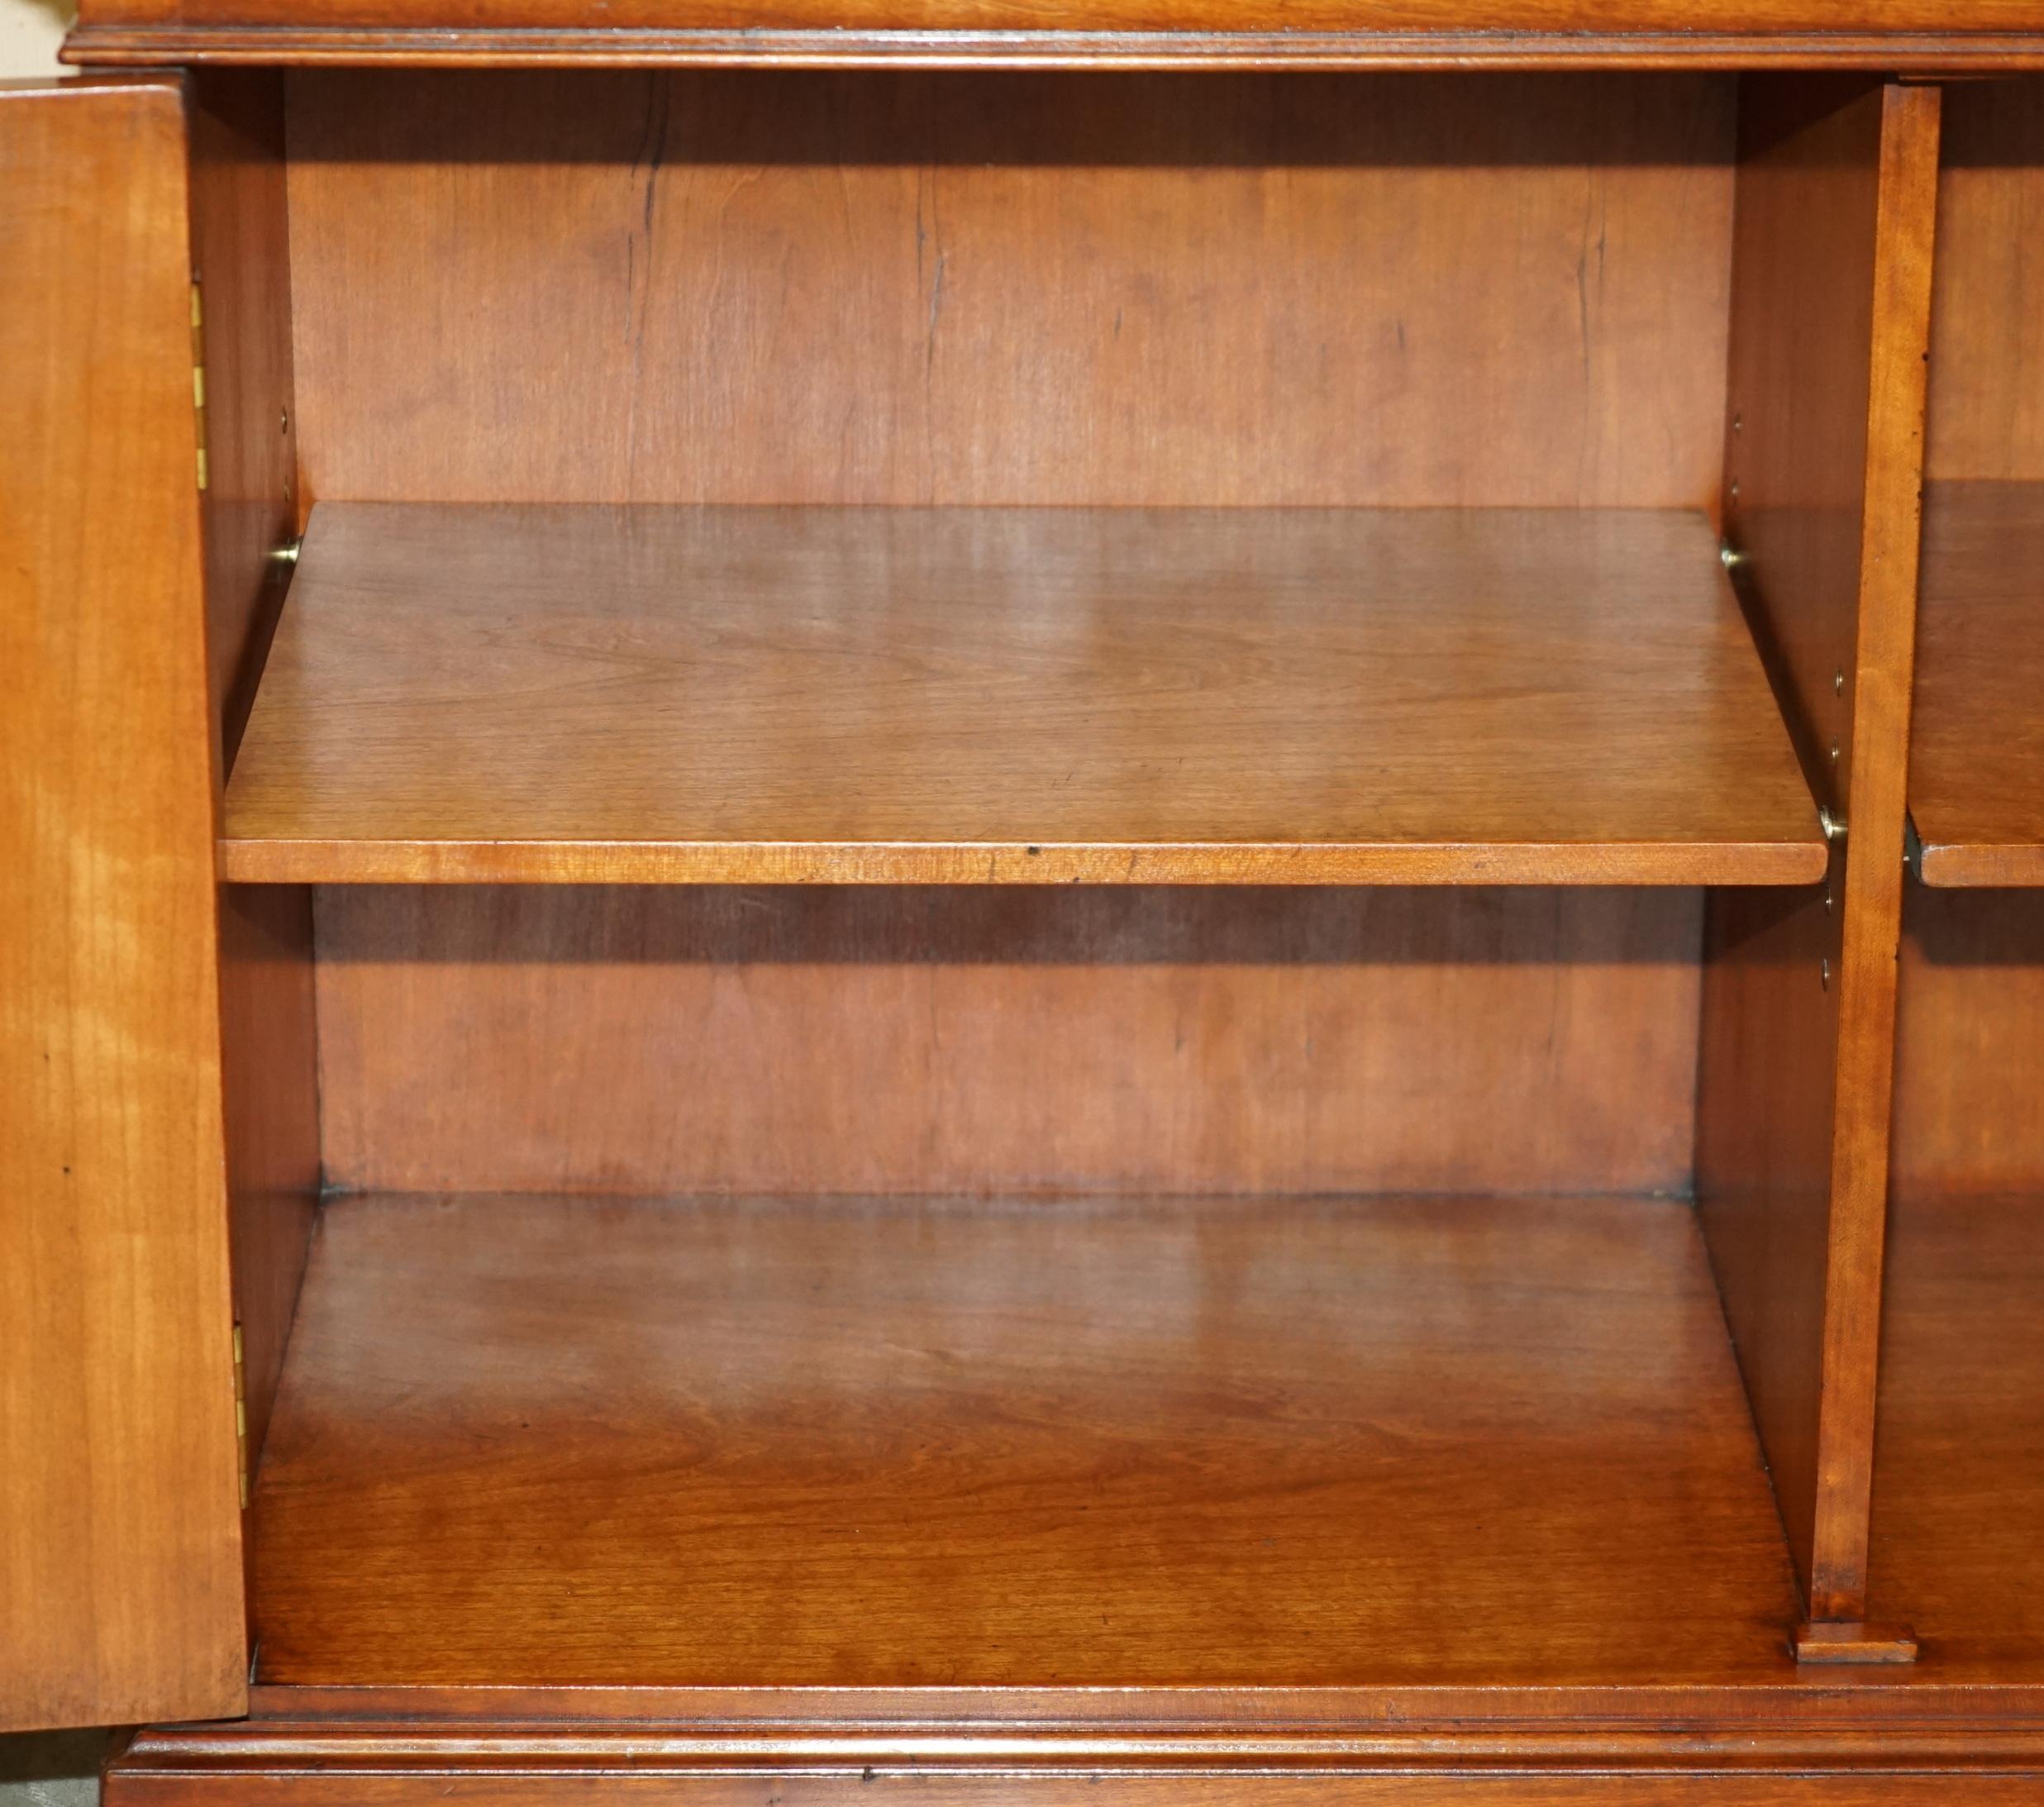 HARRODS LONDON REH KENNEDY ASTRAL GLAZED LiBRARY BOOKCASE CUPBOARD STORAGE UNIT For Sale 13